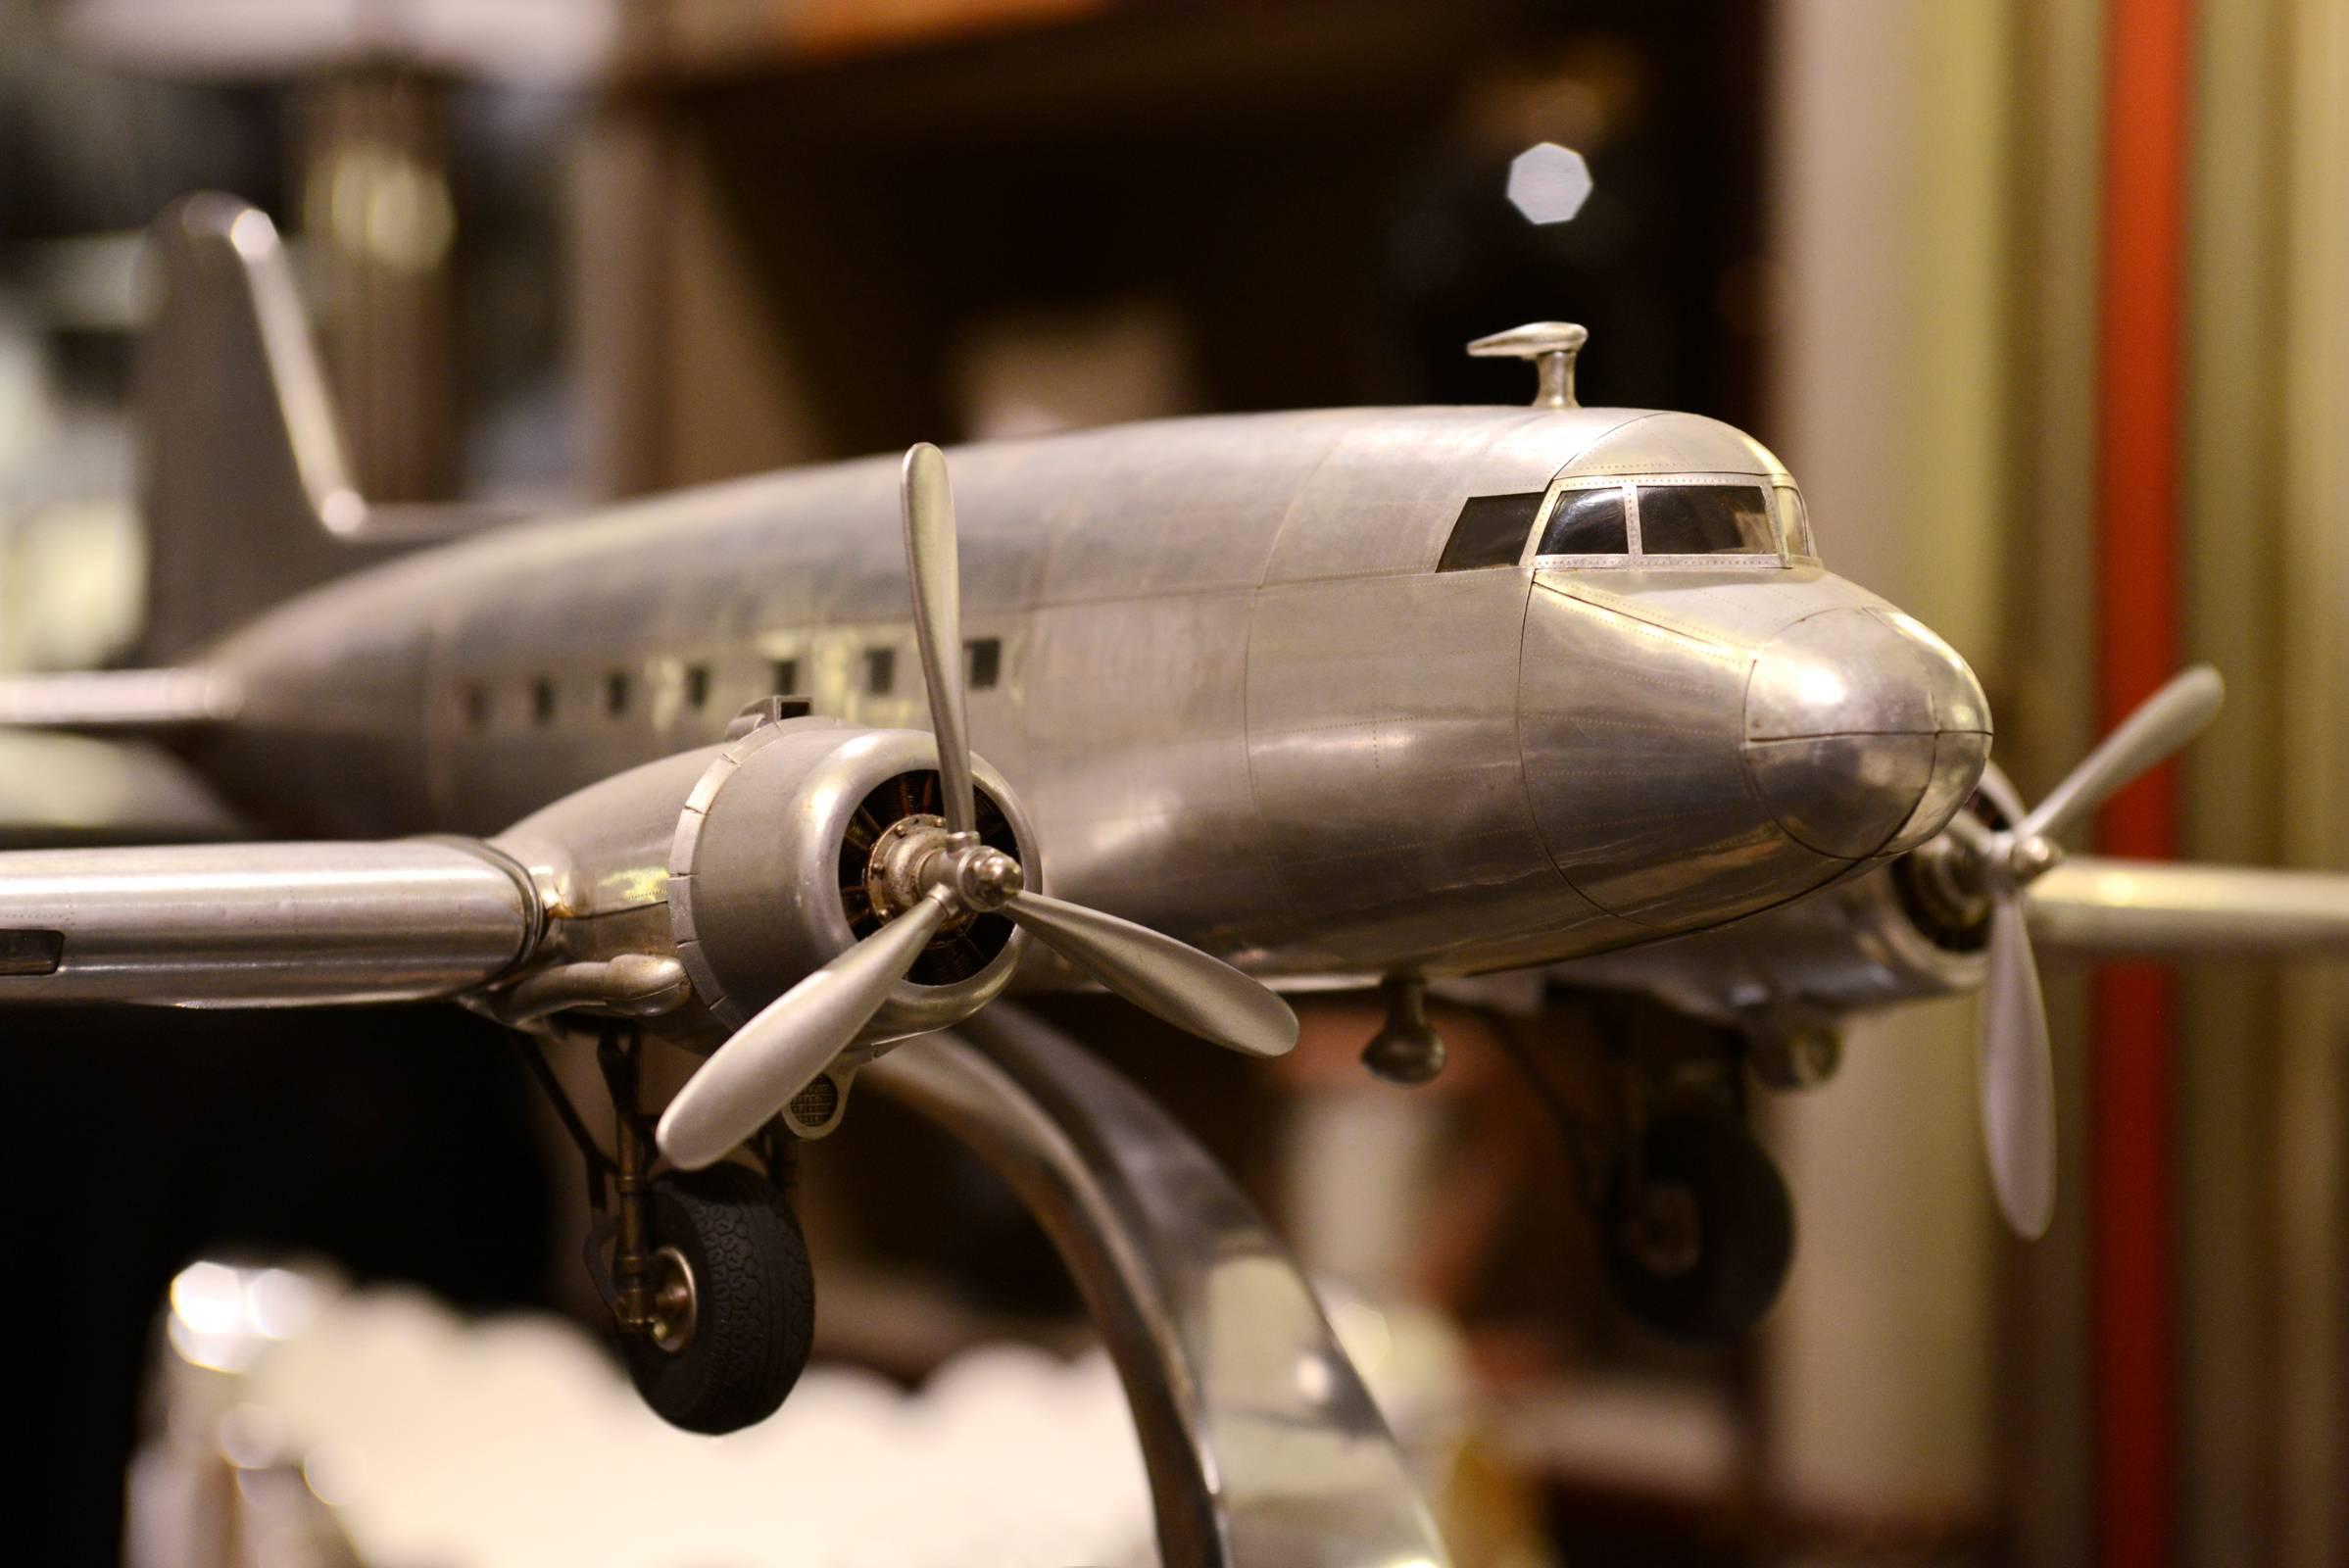 DC-3, Dakota aircraft reduced model scale model.
Handcrafted in aluminium foil,
with engraved metal rivets, 1936.
.